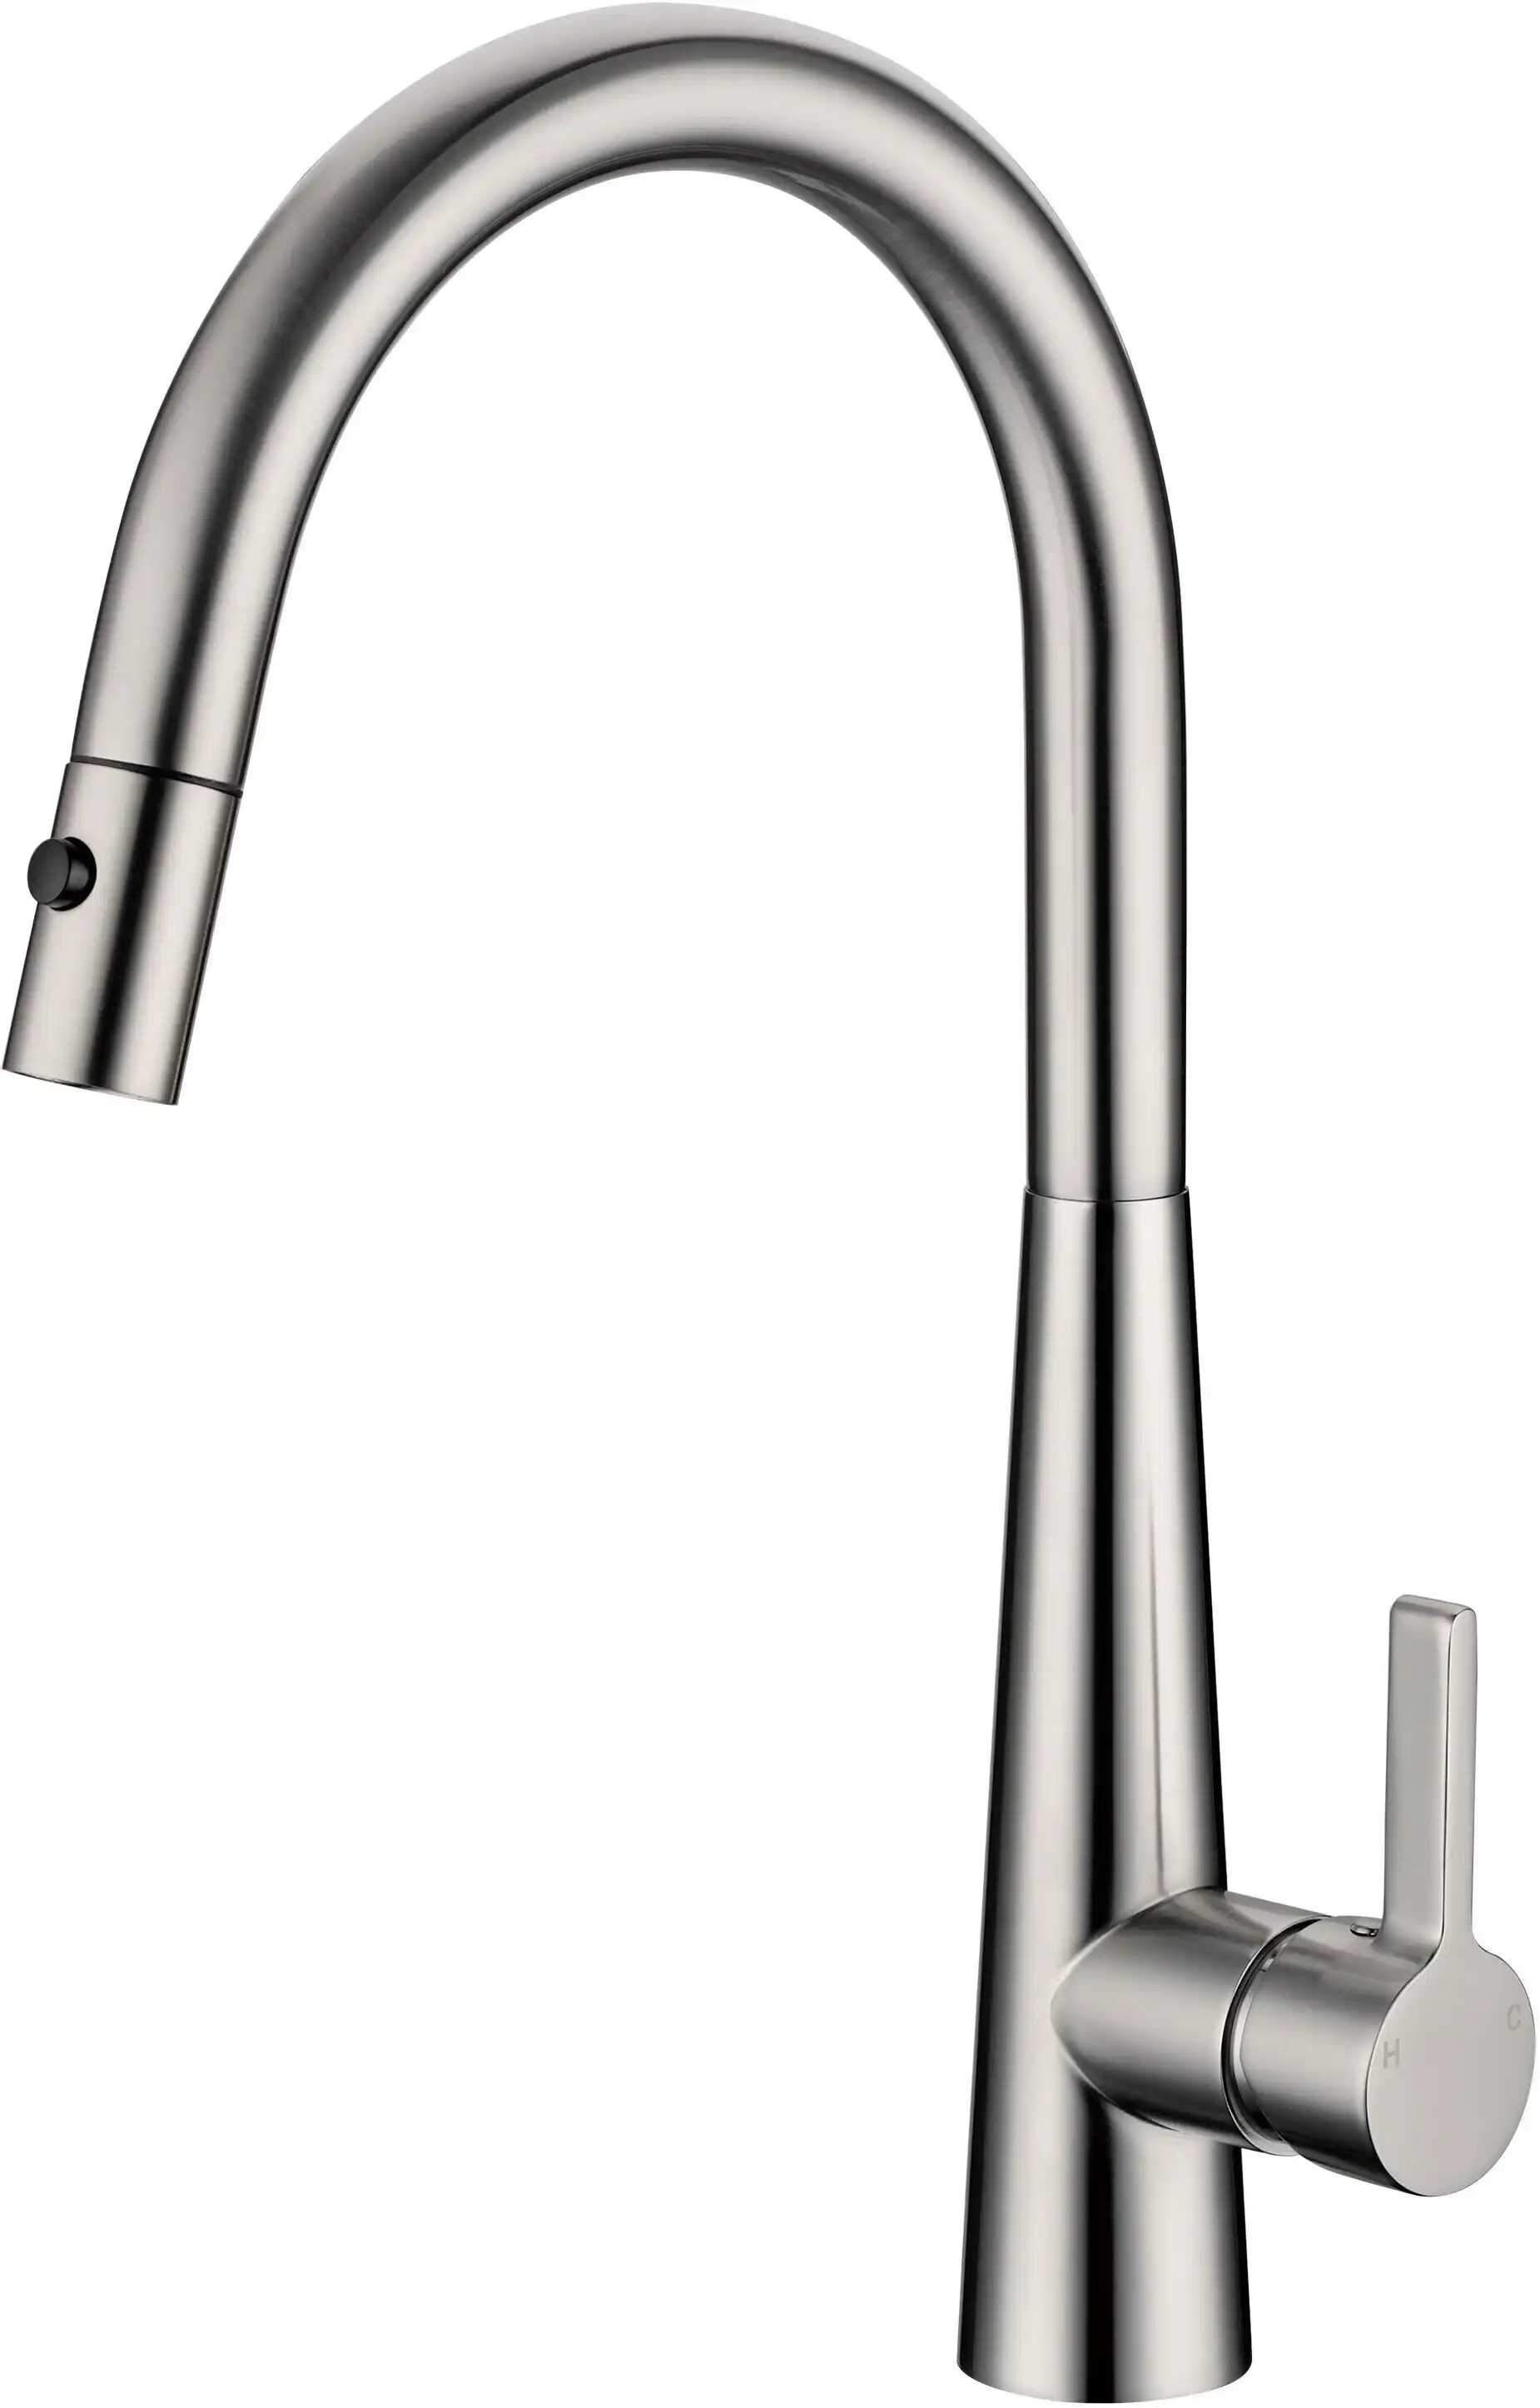 Casa Pull-out Sink Mixer Tap Brushed Nickel CASA1017SB-BN